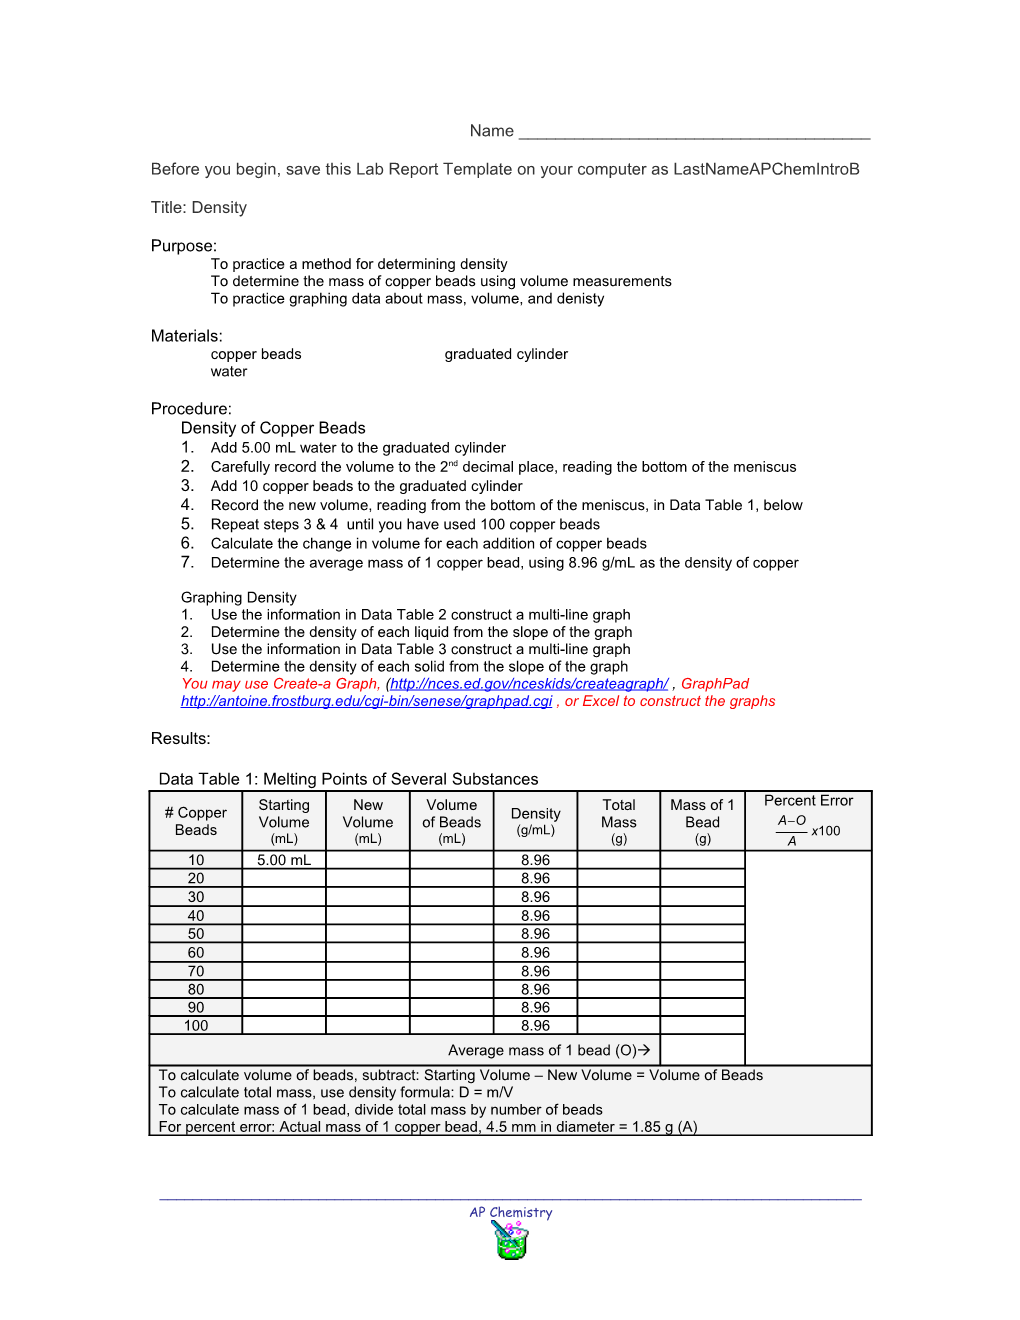 Before You Begin, Save This Lab Report Template on Your Computer As Lastnameapchemintrob